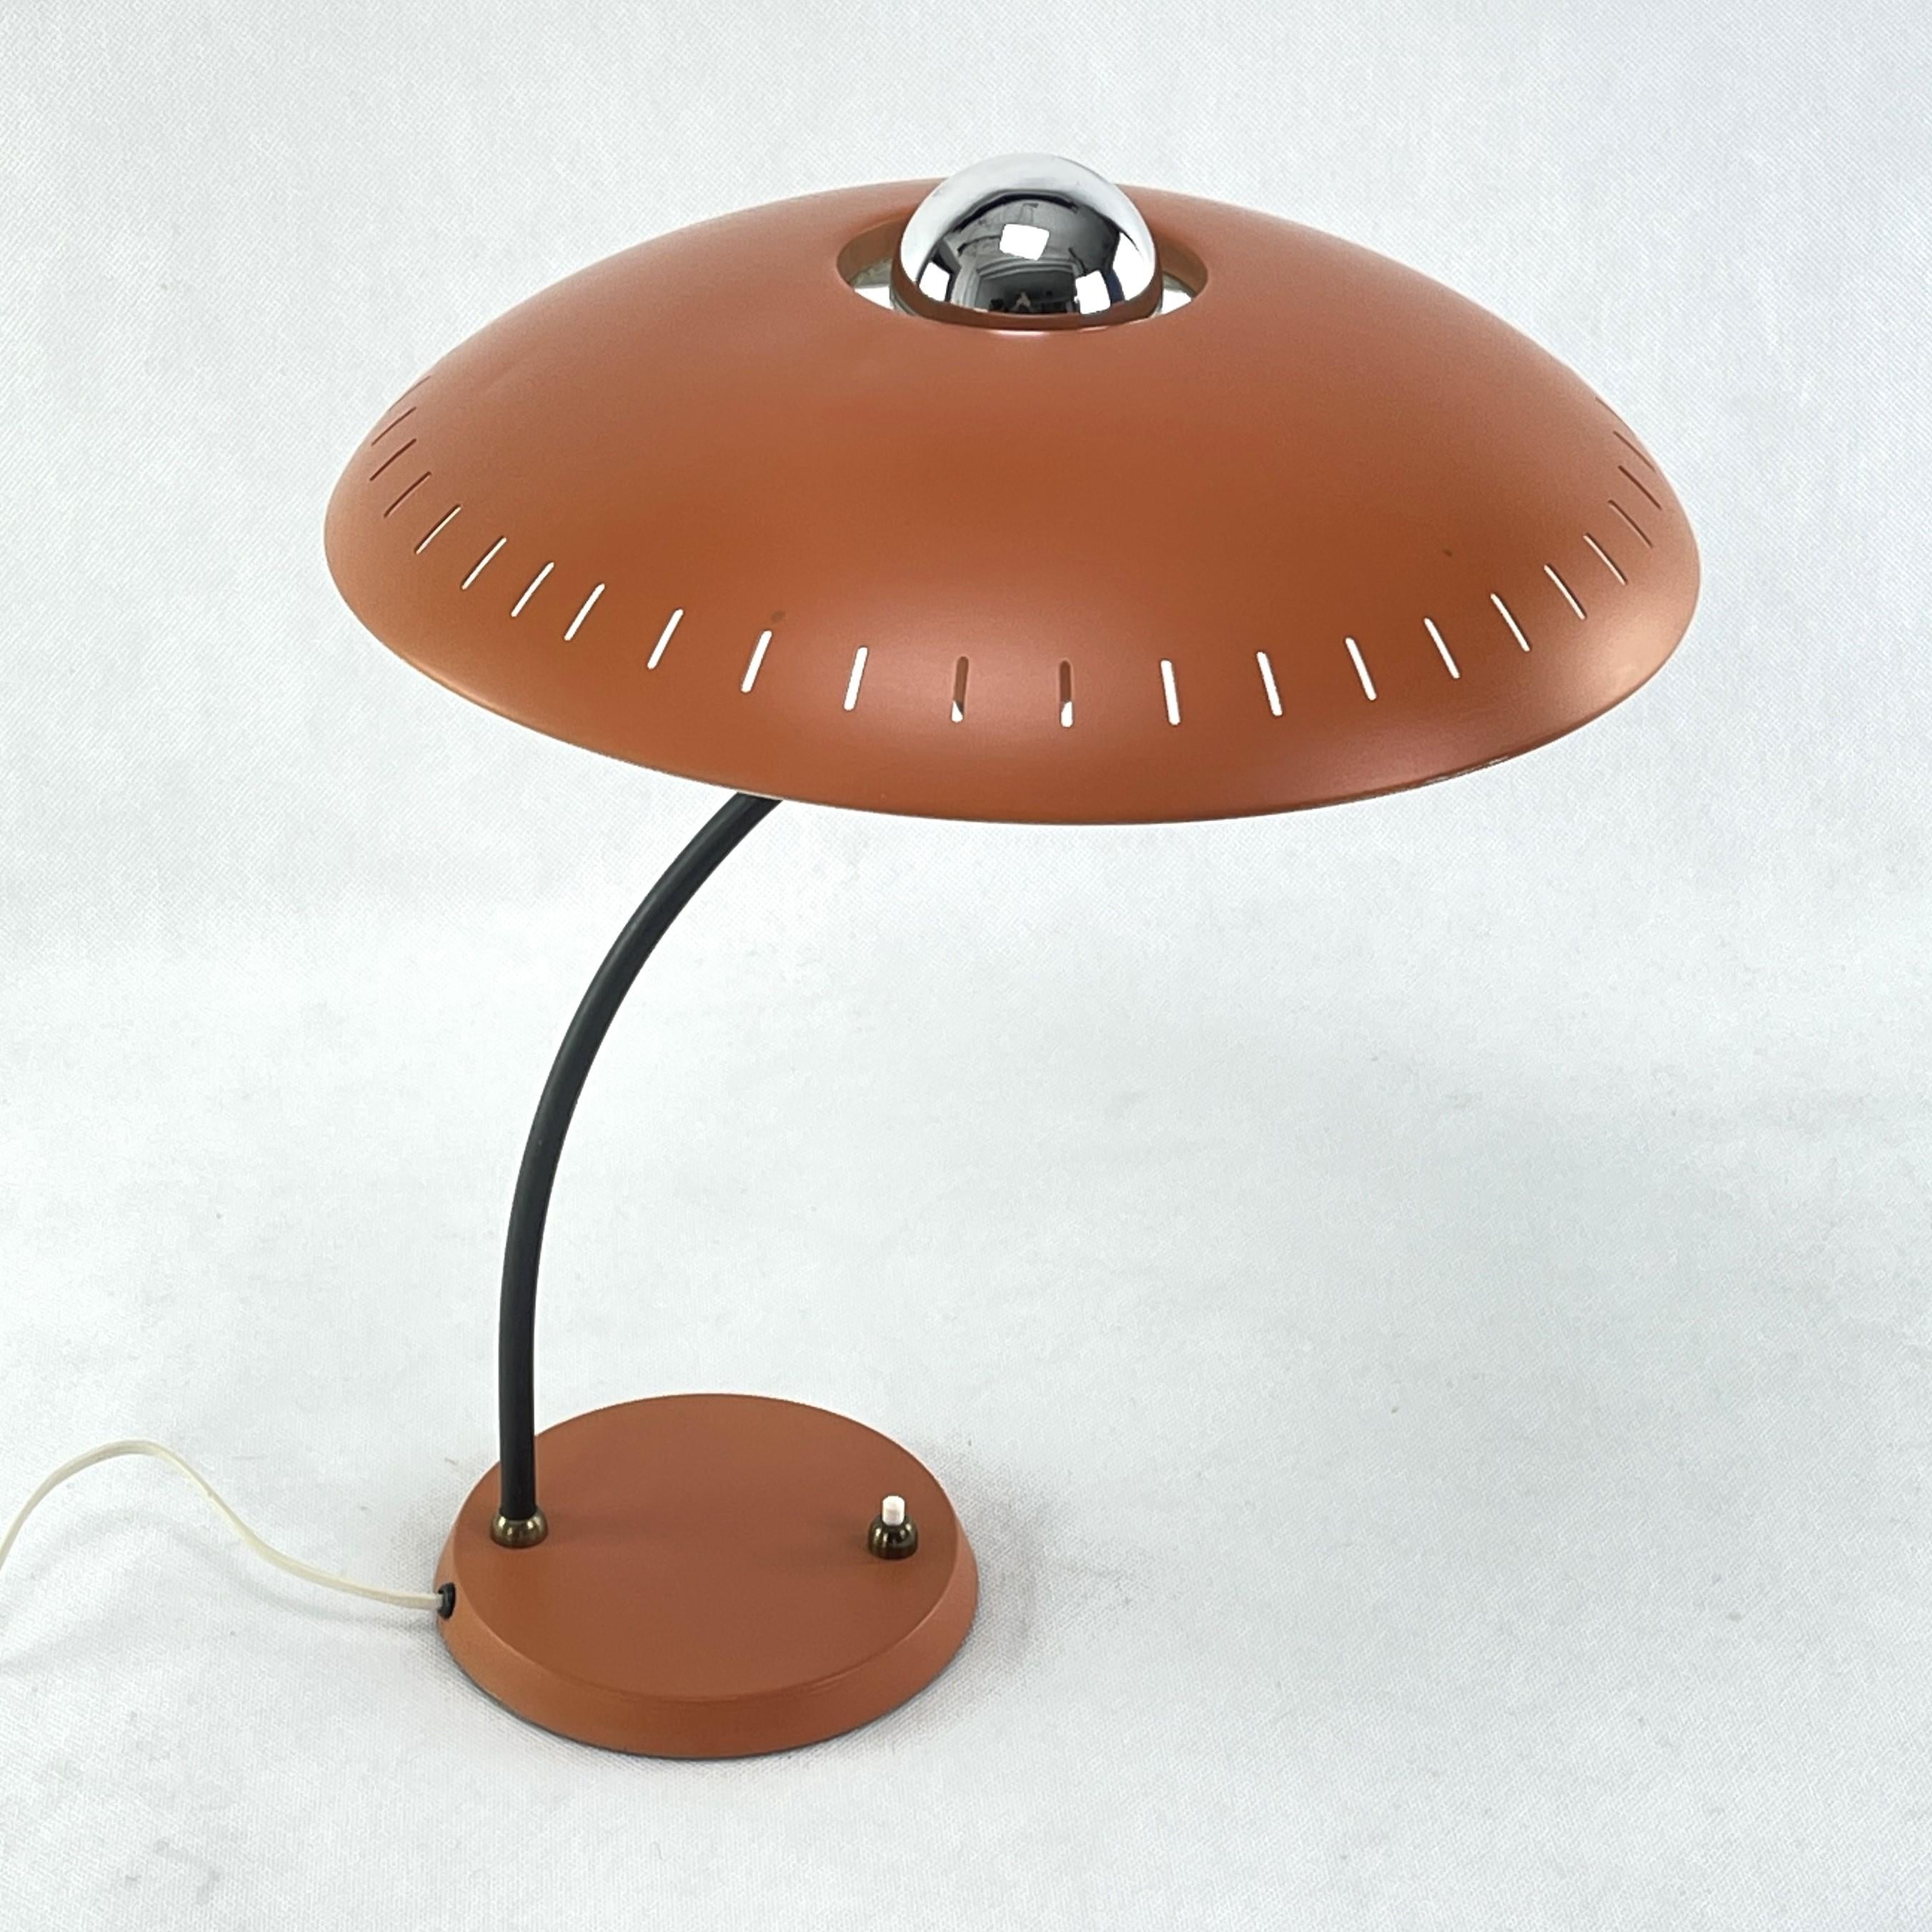 Vintage Table Lamp Junior from Philips - 1950s

The beautiful lamp is a real design classic from the 50s/60s. This lamp in an extraordinary design is a highlight for every lounge interior.
This model comes from the famous designer Louis Christian